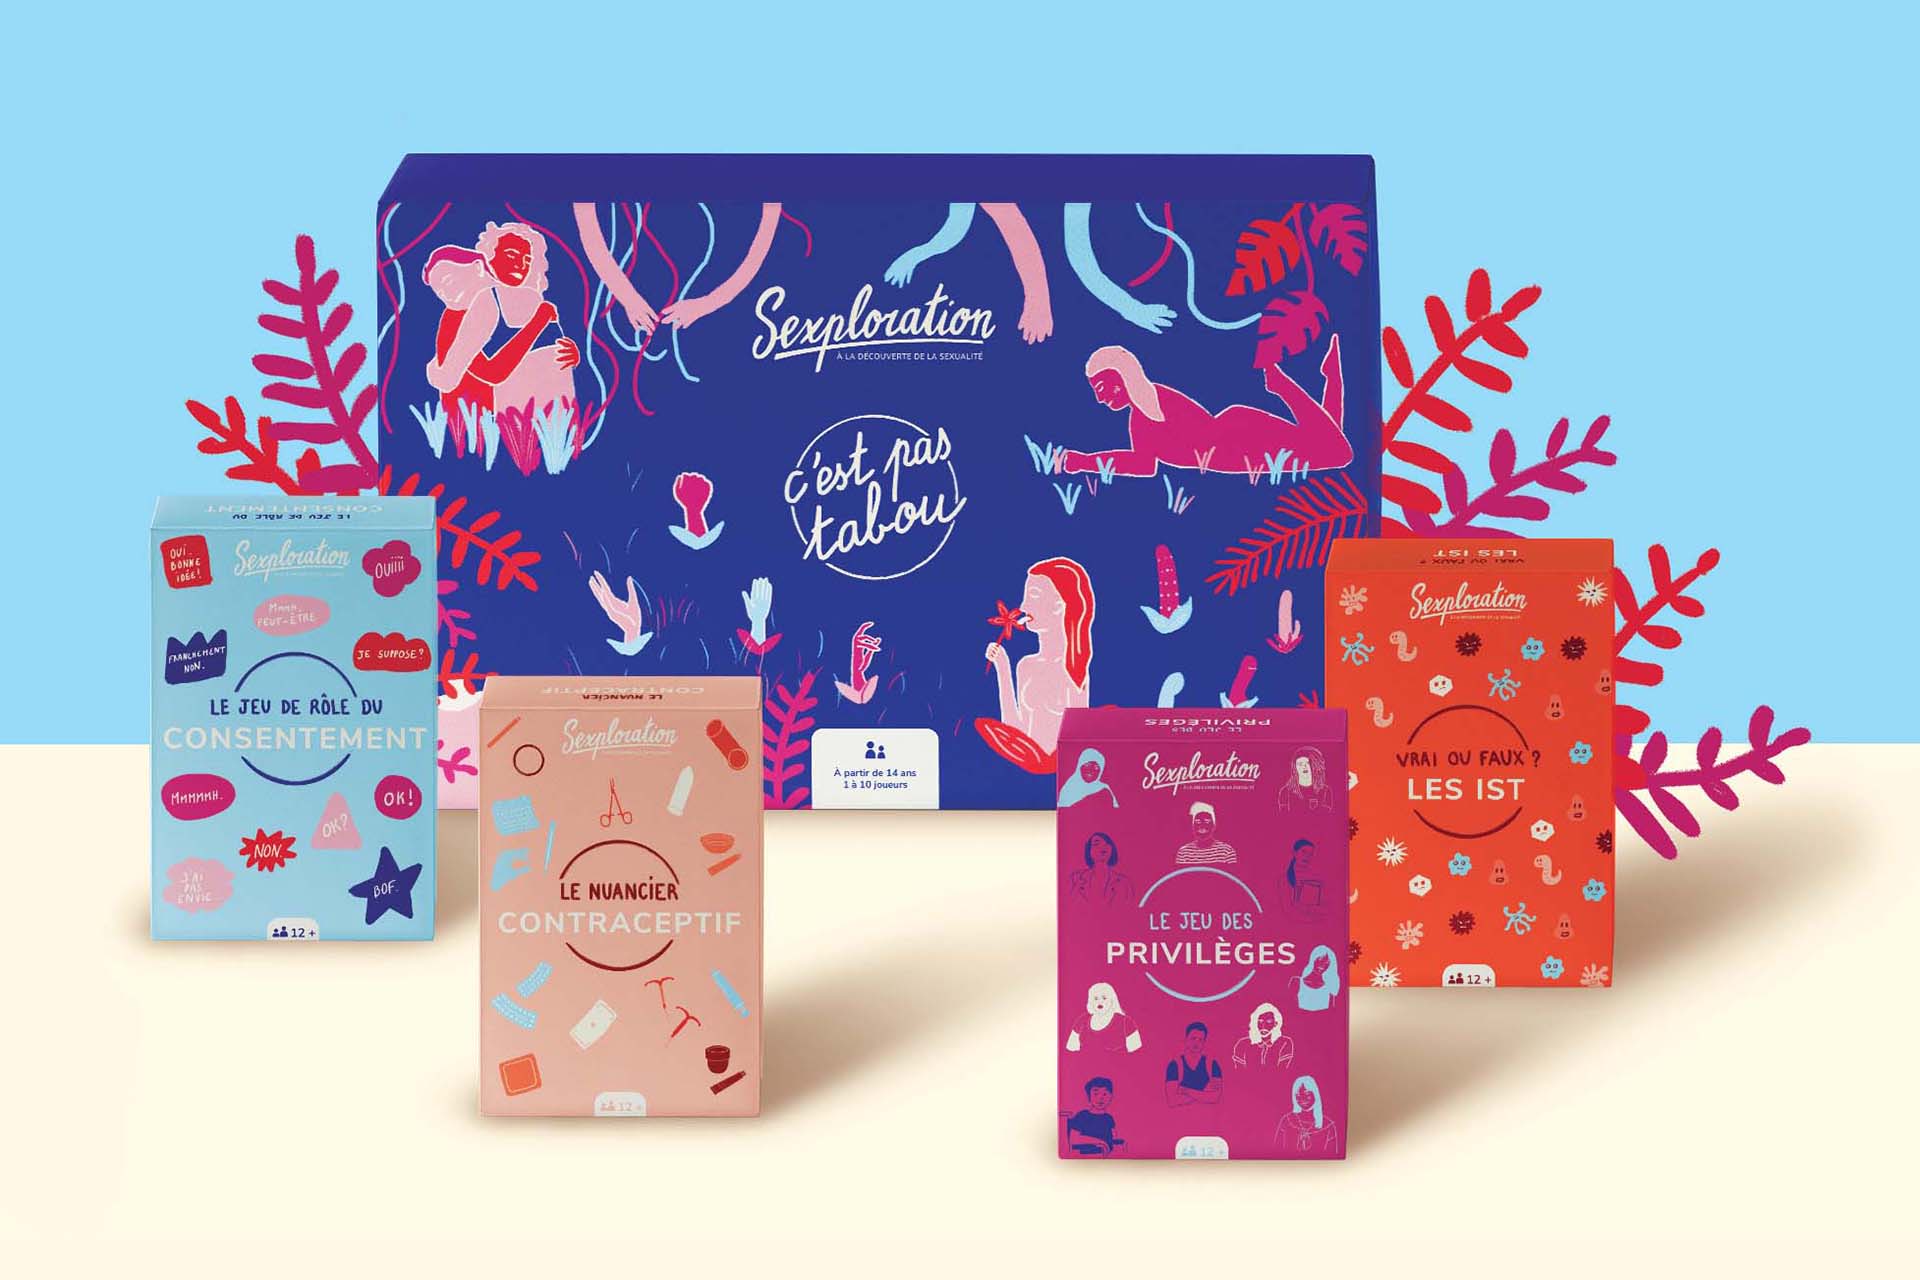 Five boxes of colorful, illustrated sex education board games on the themes of consent, contraception, STIs and privilege.